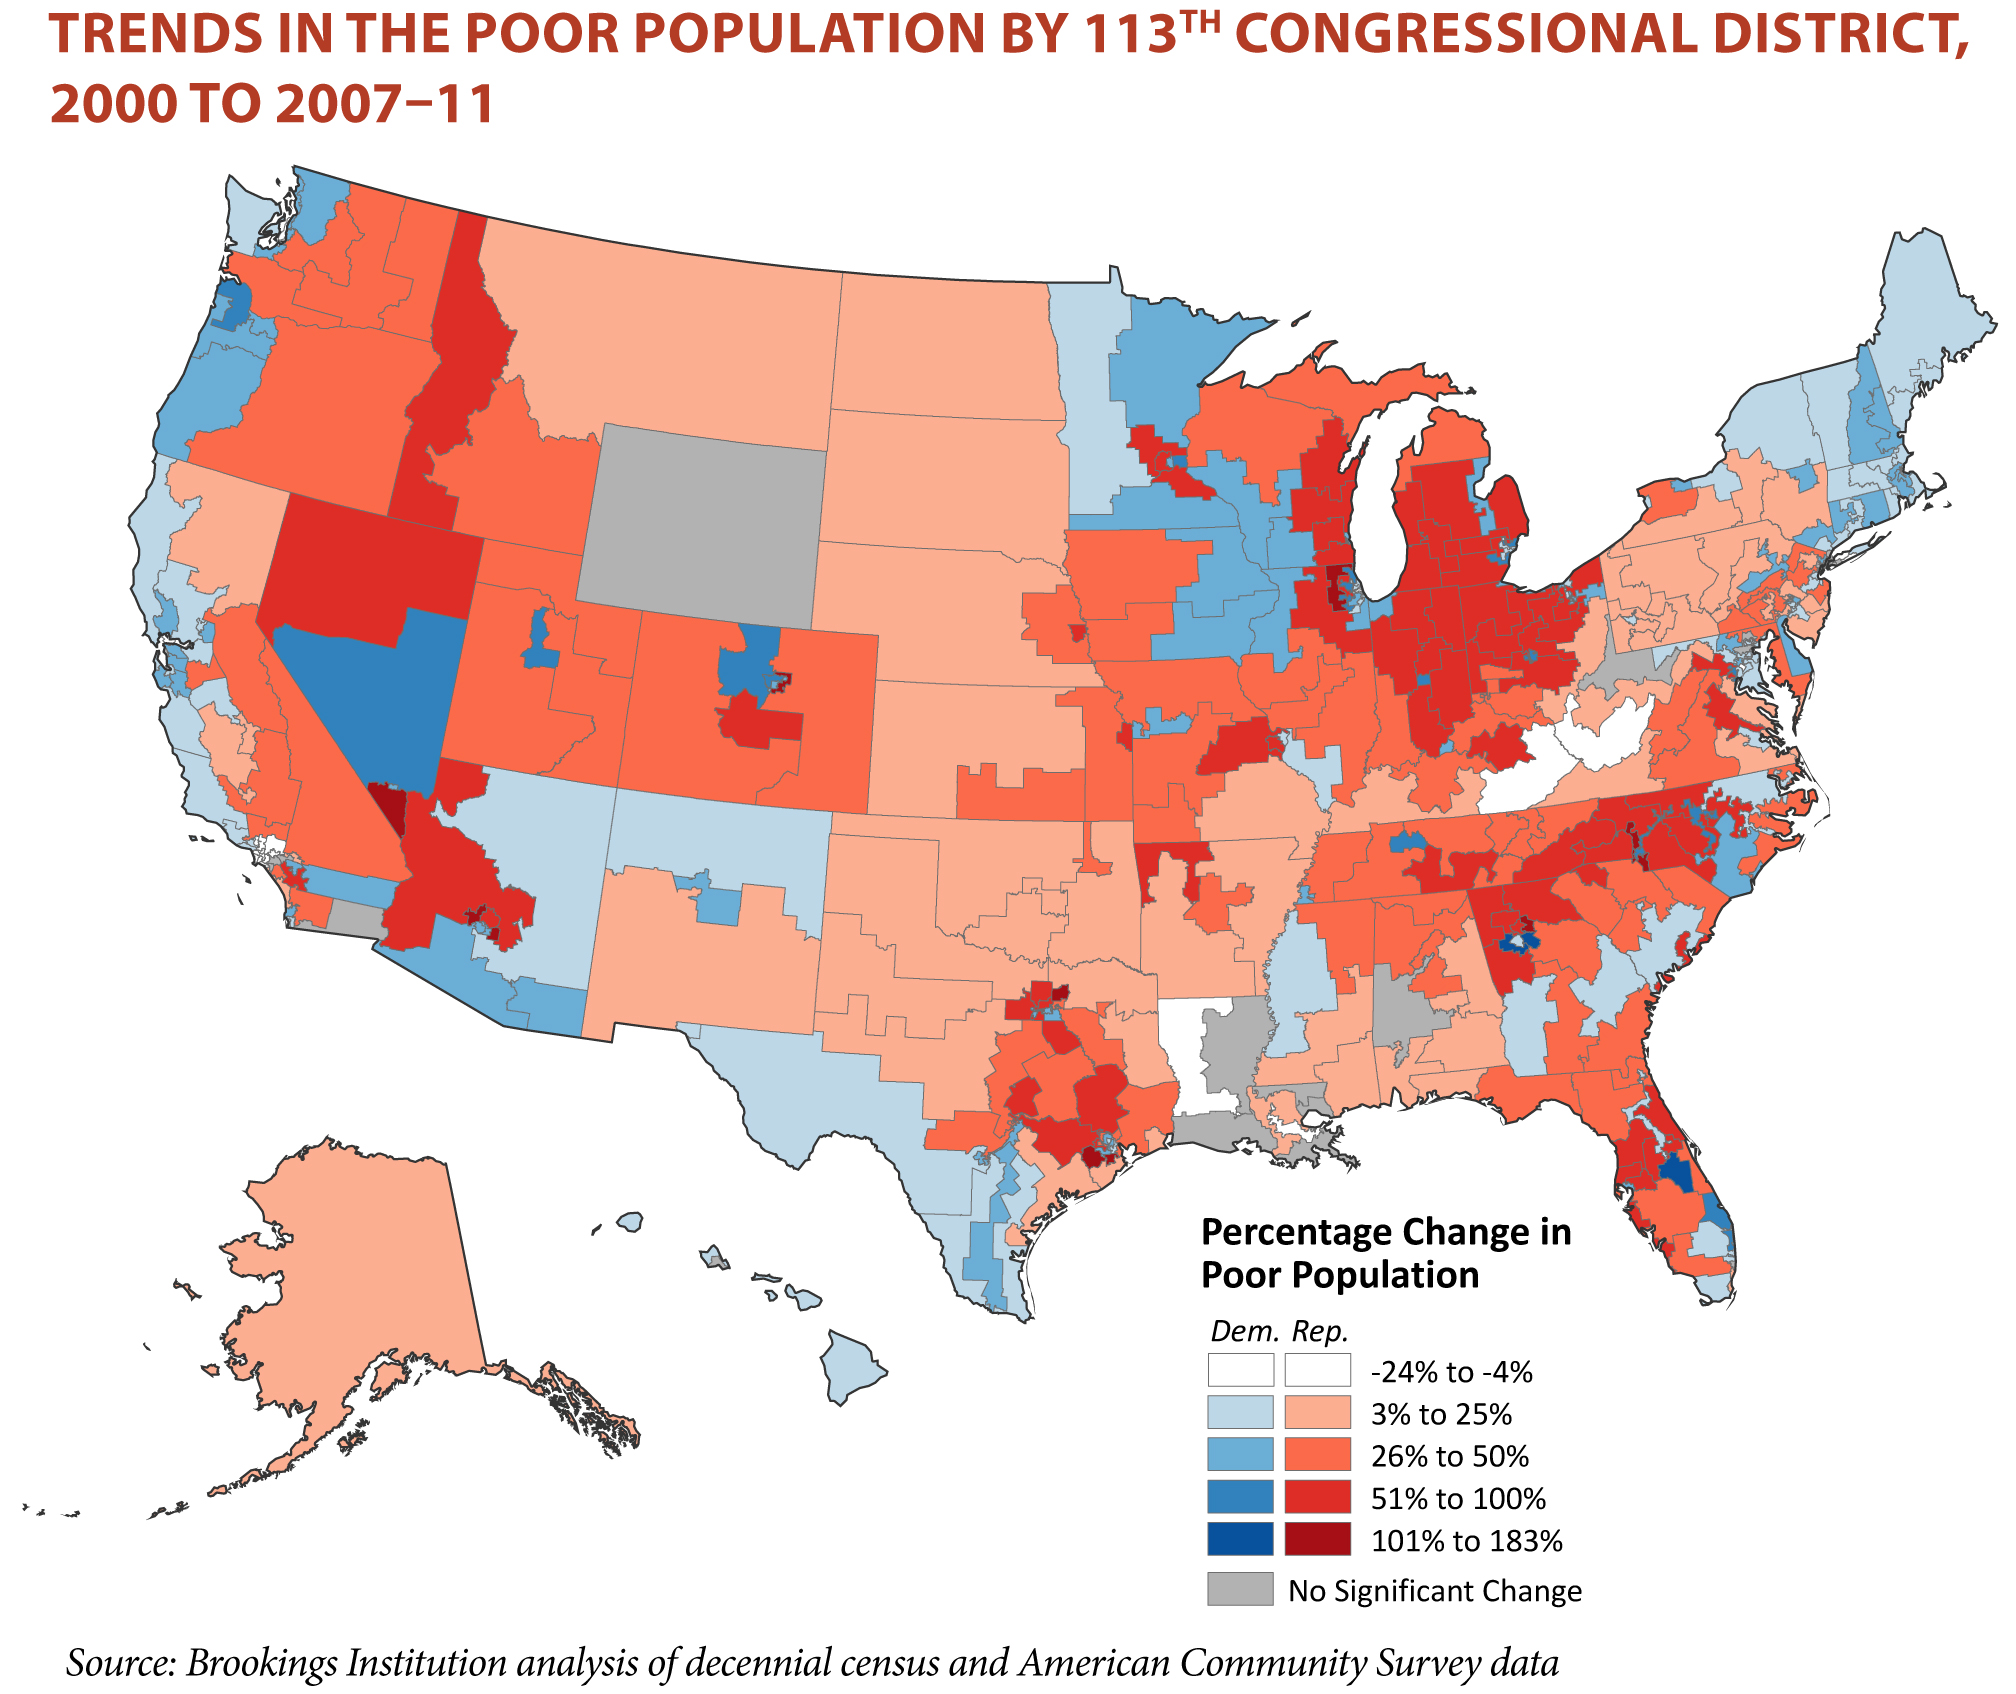 Trends in the Poor Population by 113th Congressional District